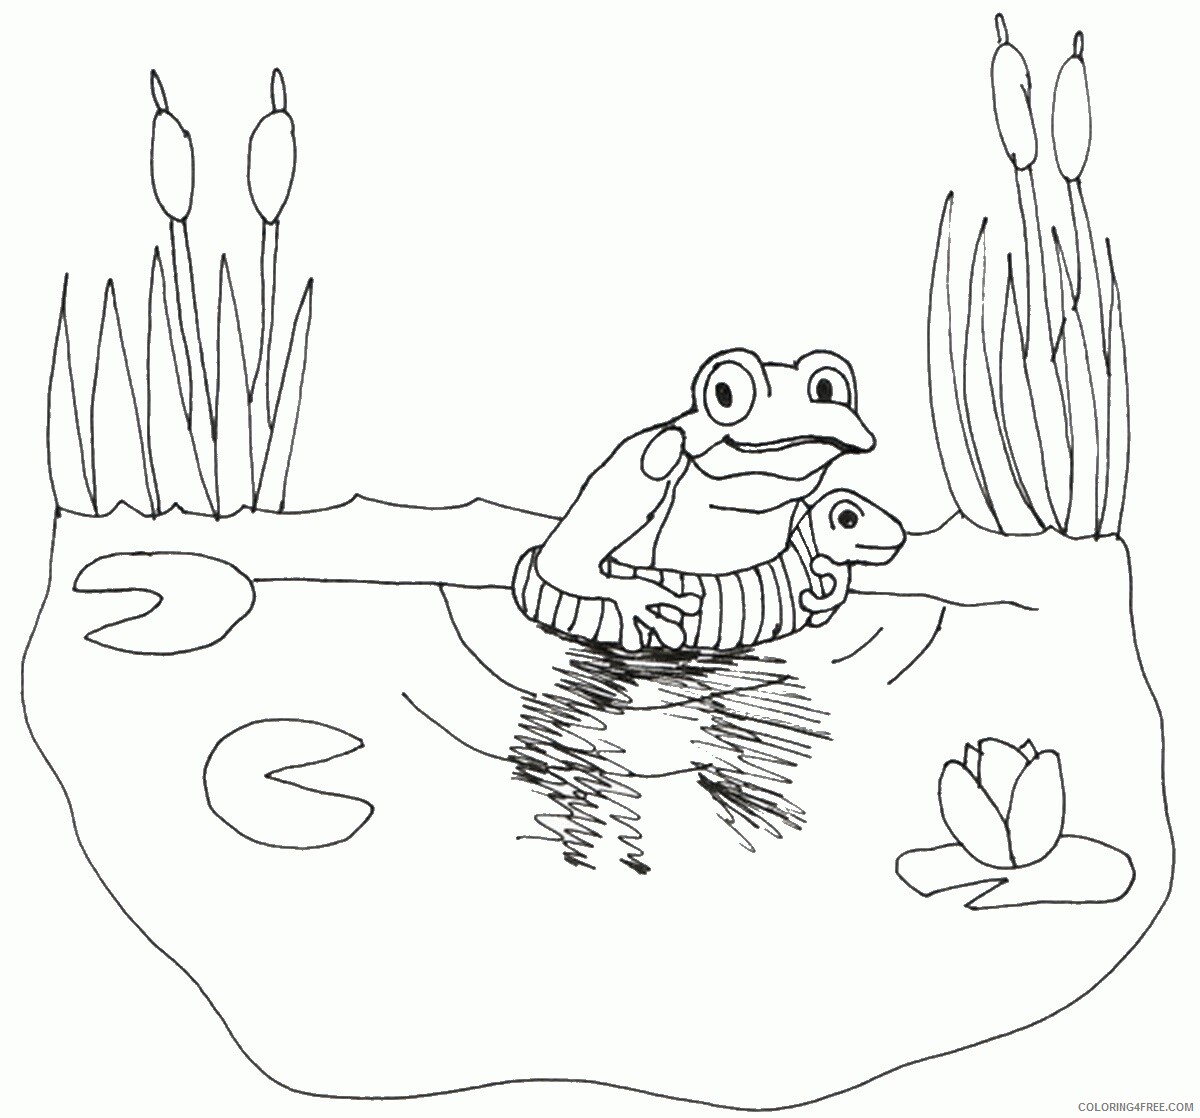 Frog Coloring Pages Animal Printable Sheets frogsc4 2021 2327 Coloring4free